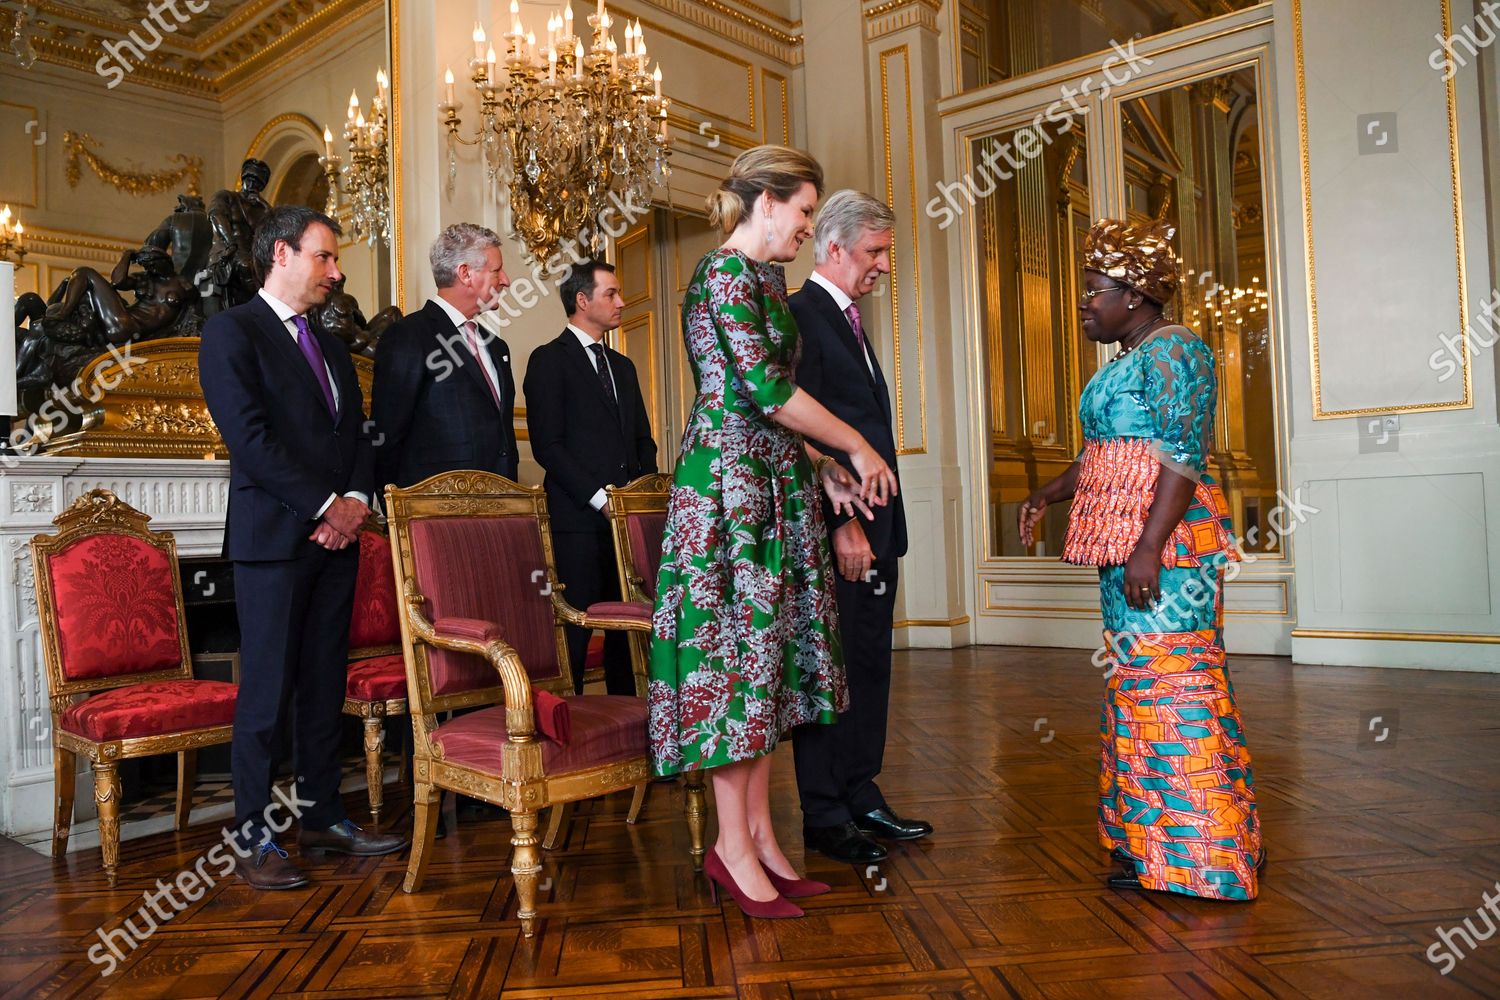 CASA REAL BELGA - Página 93 King-philippe-and-queen-mathilde-receive-the-heads-of-diplomatic-missions-brussels-belgium-shutterstock-editorial-10525487aa